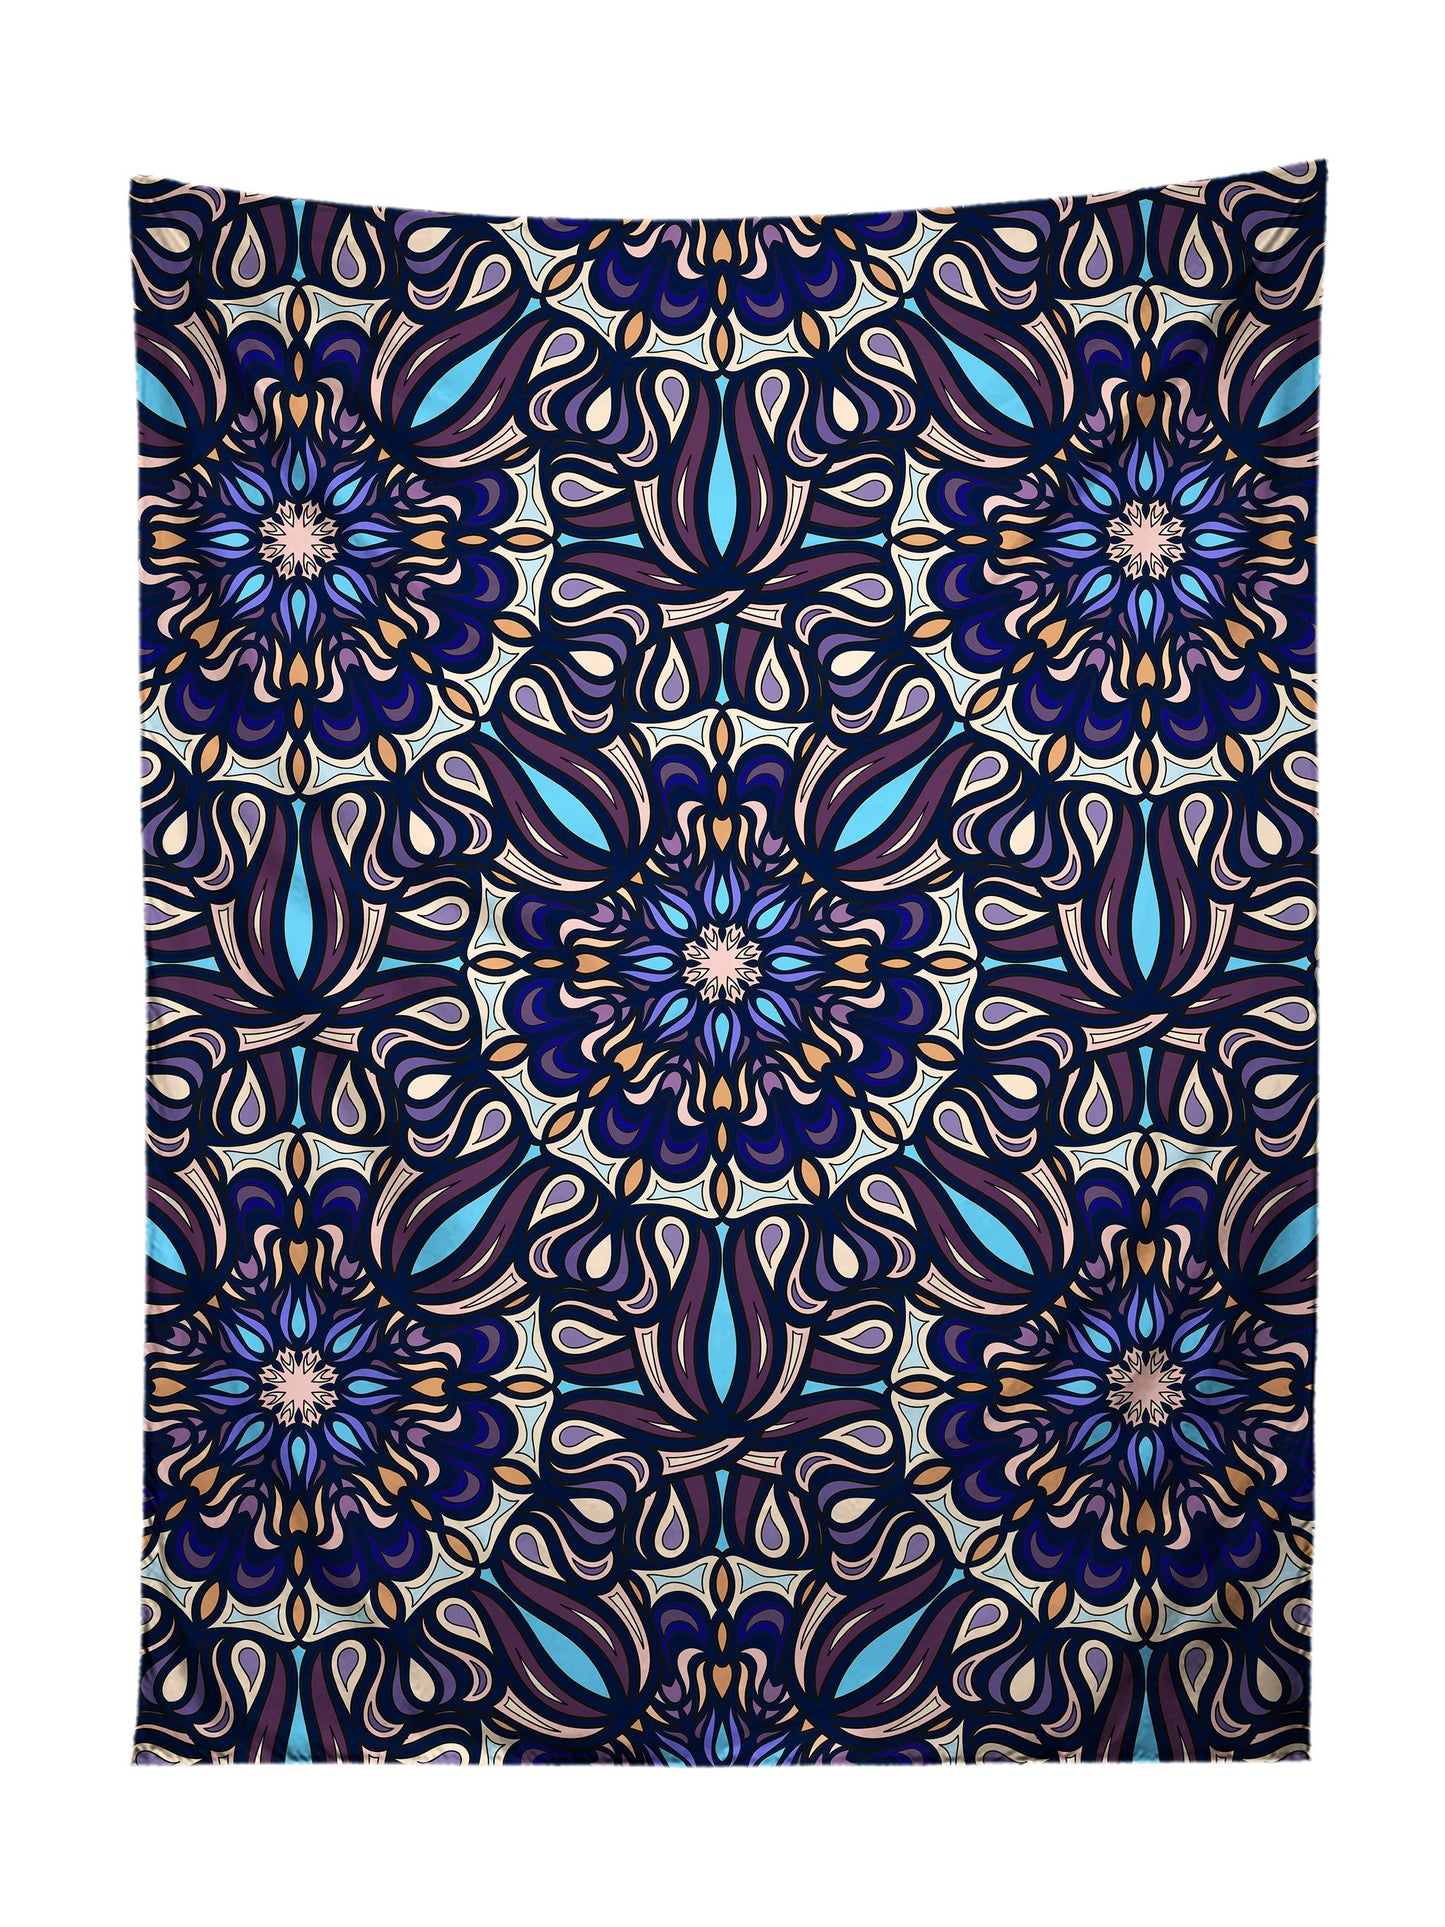 Vertical hanging view of all over print blue & white mandala tapestry by GratefullyDyed Apparel.